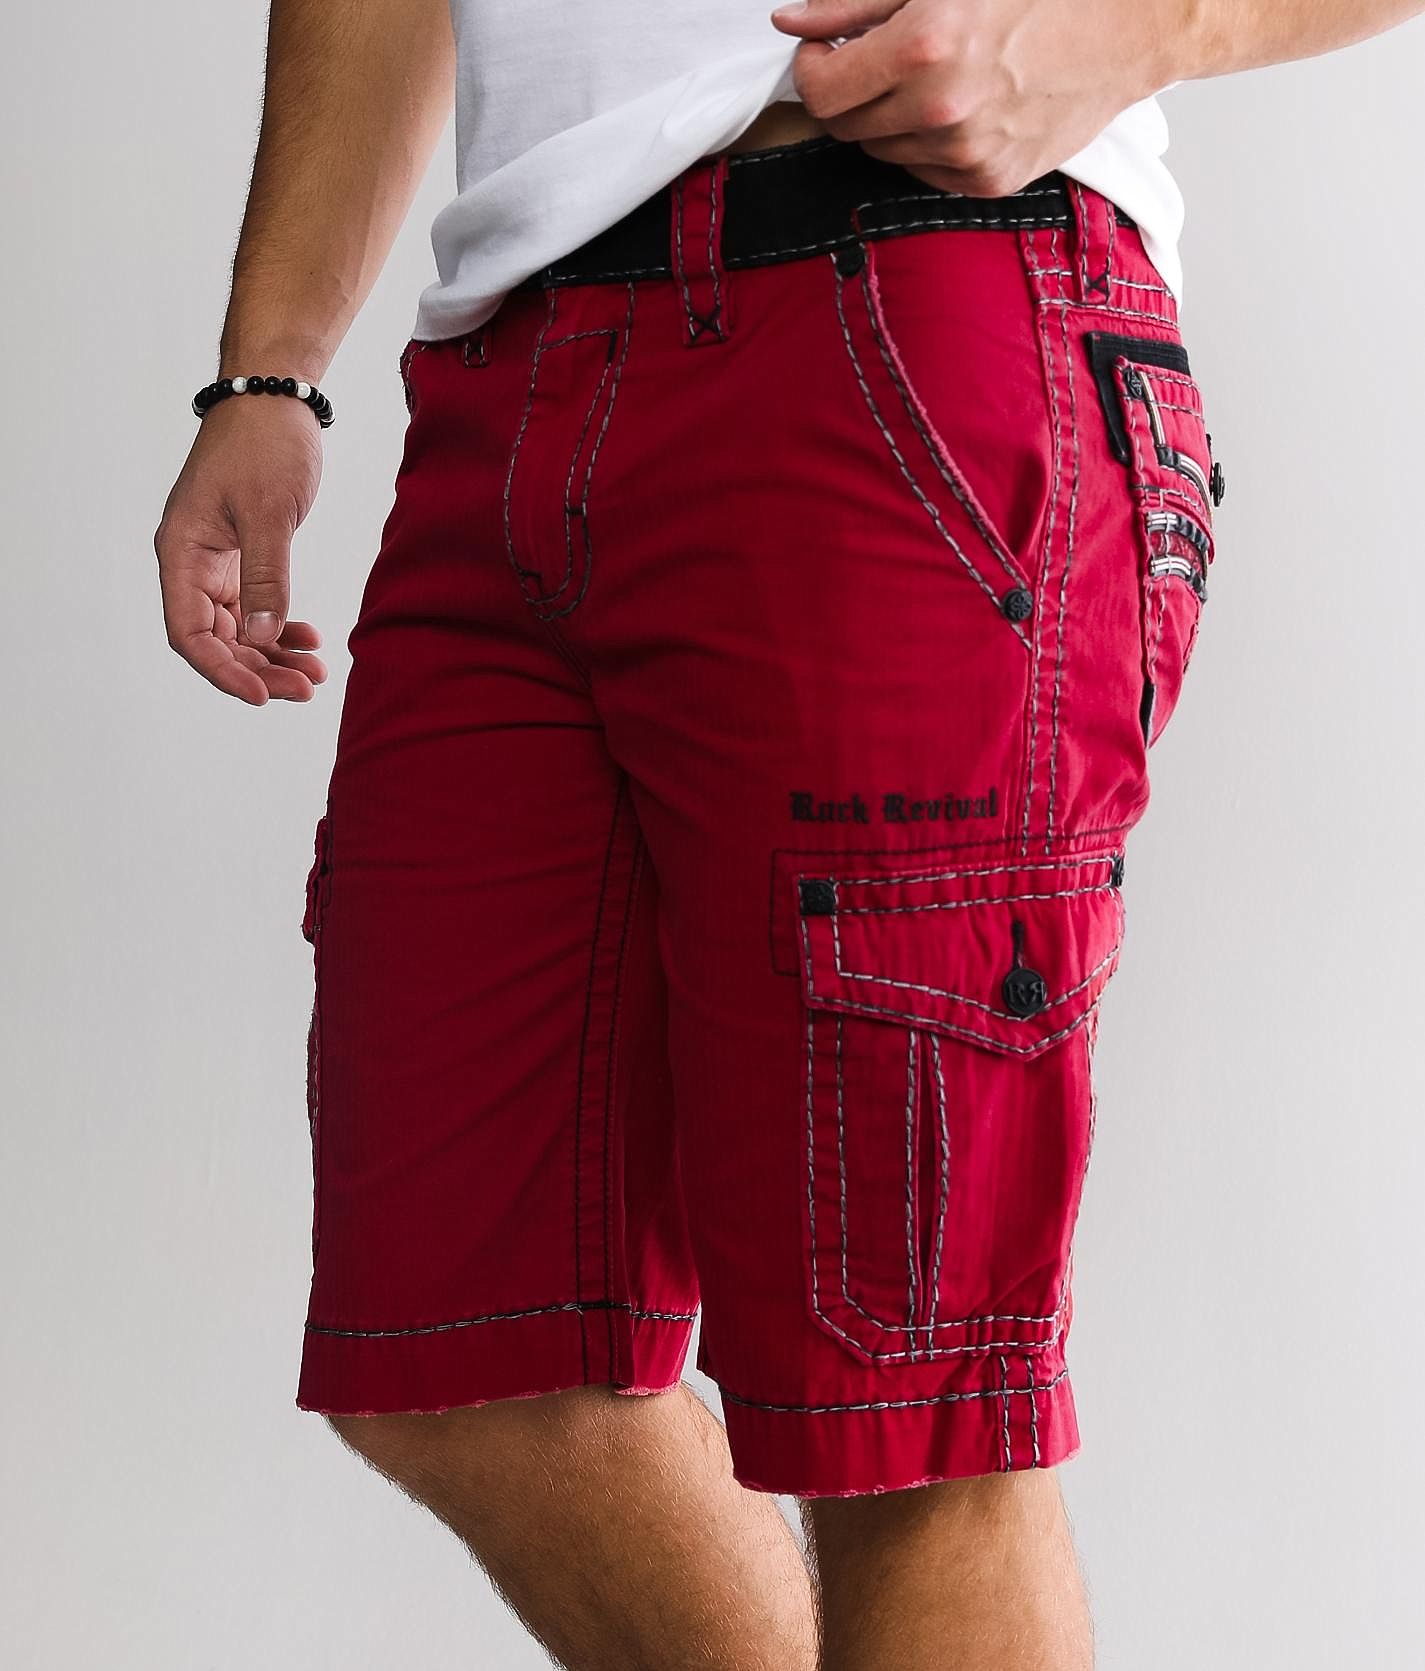 Rock Revival Classic Cargo - Men's Shorts in Red | Buckle